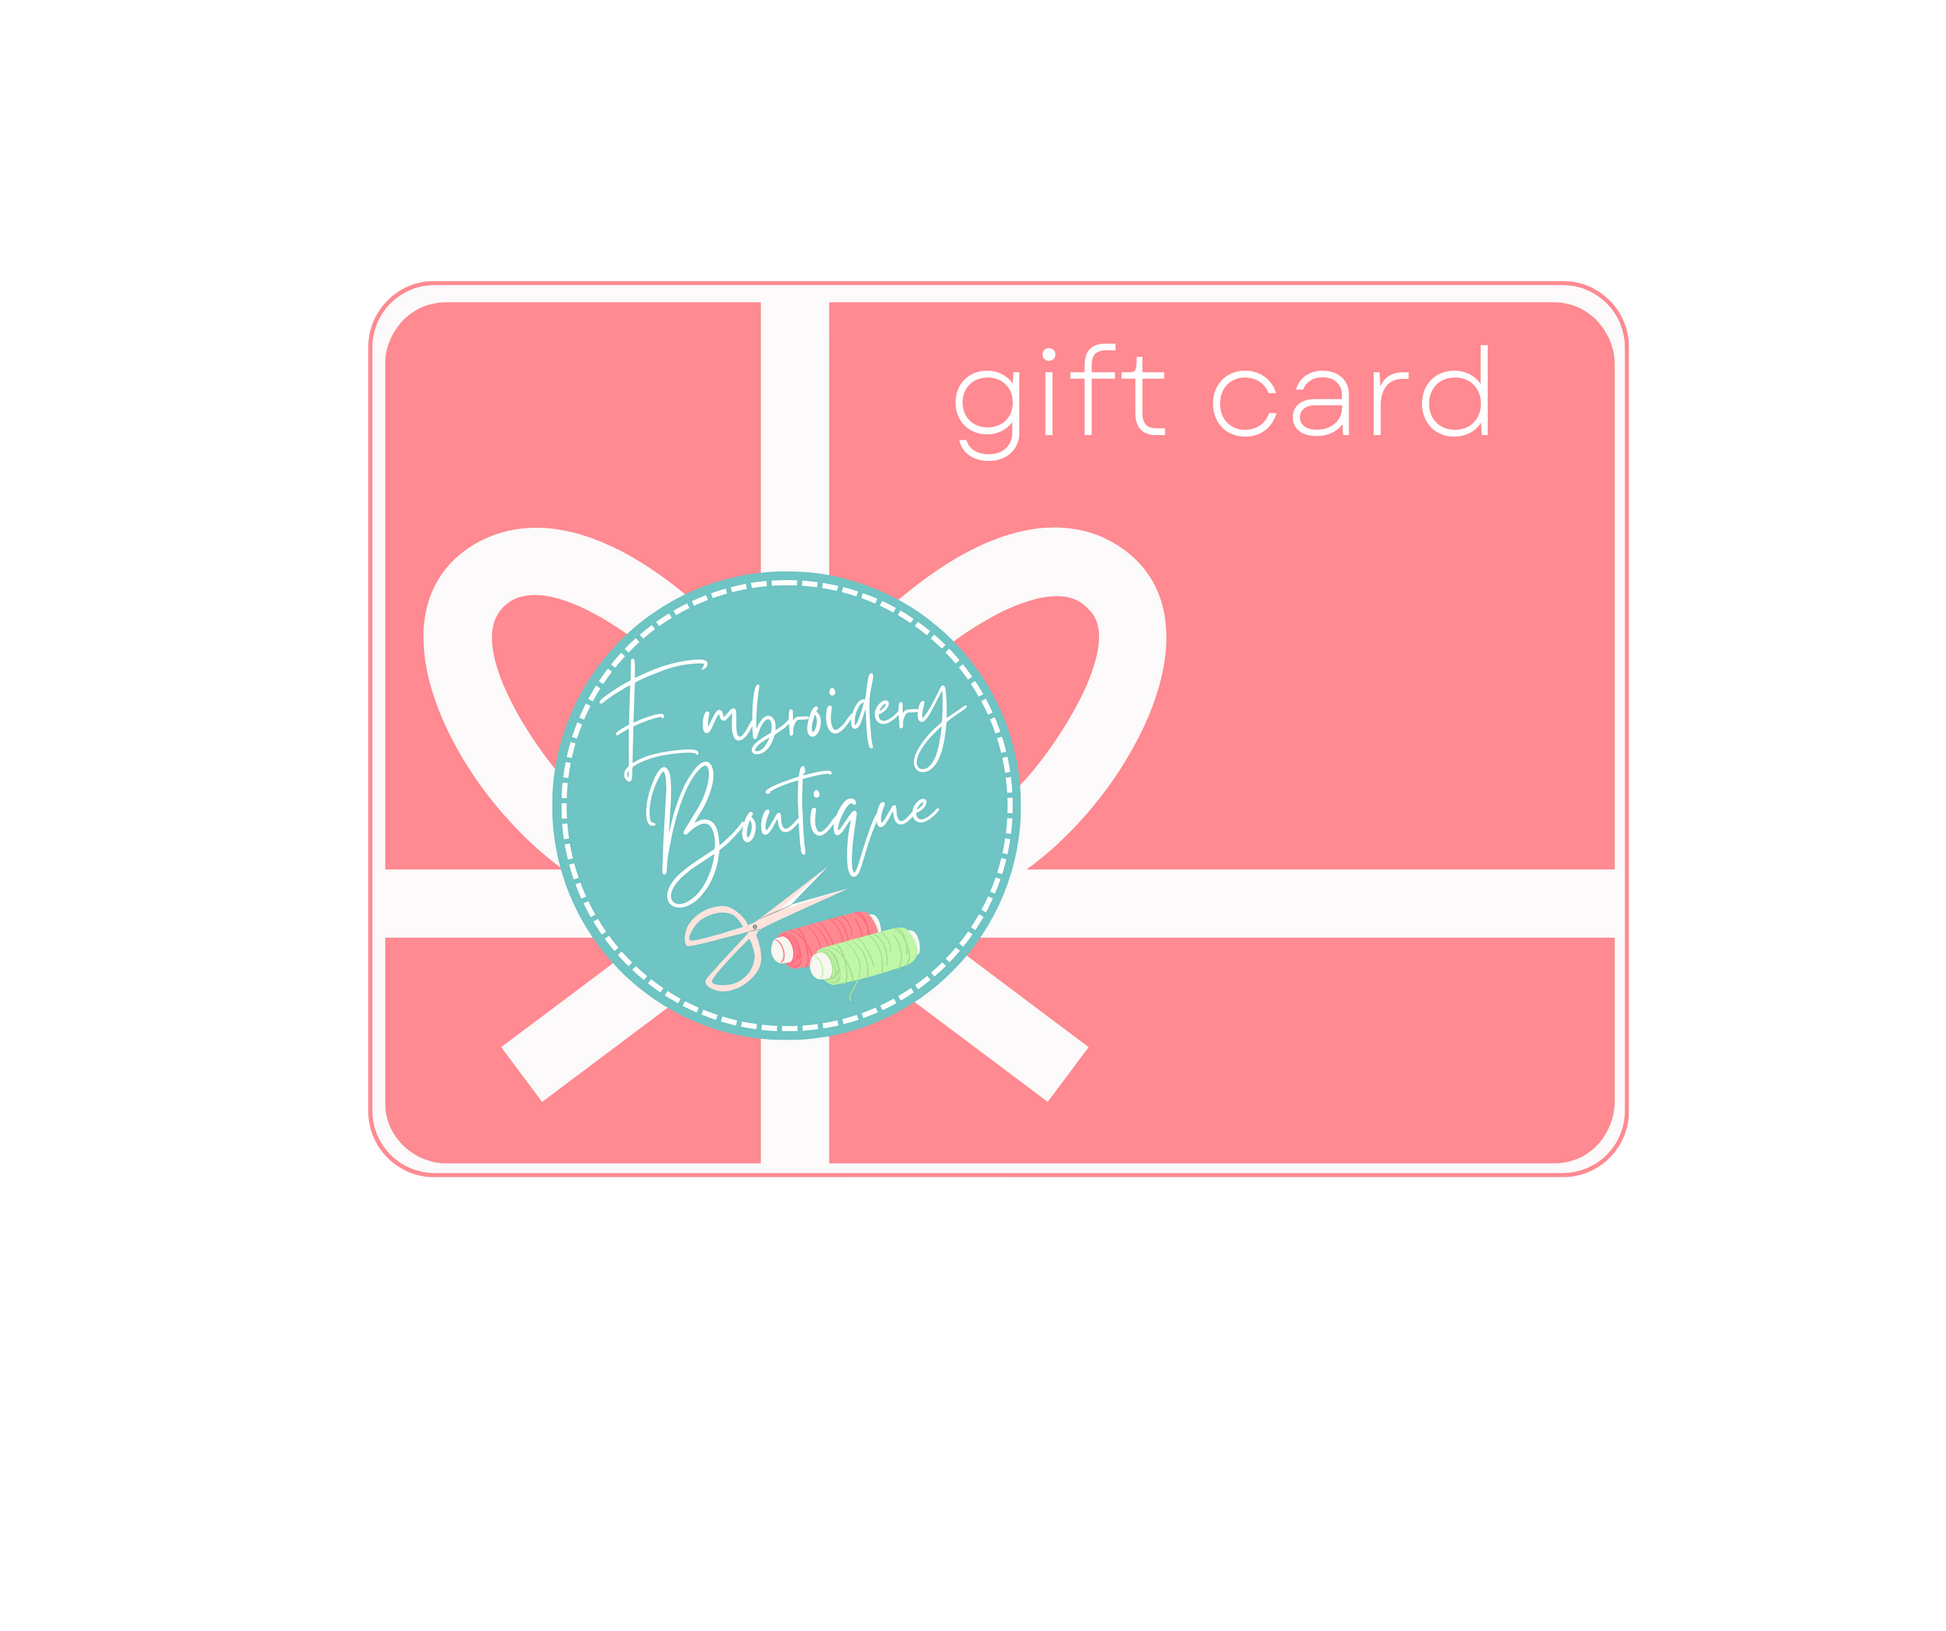 Gift Card, Gift Card, opensolutis